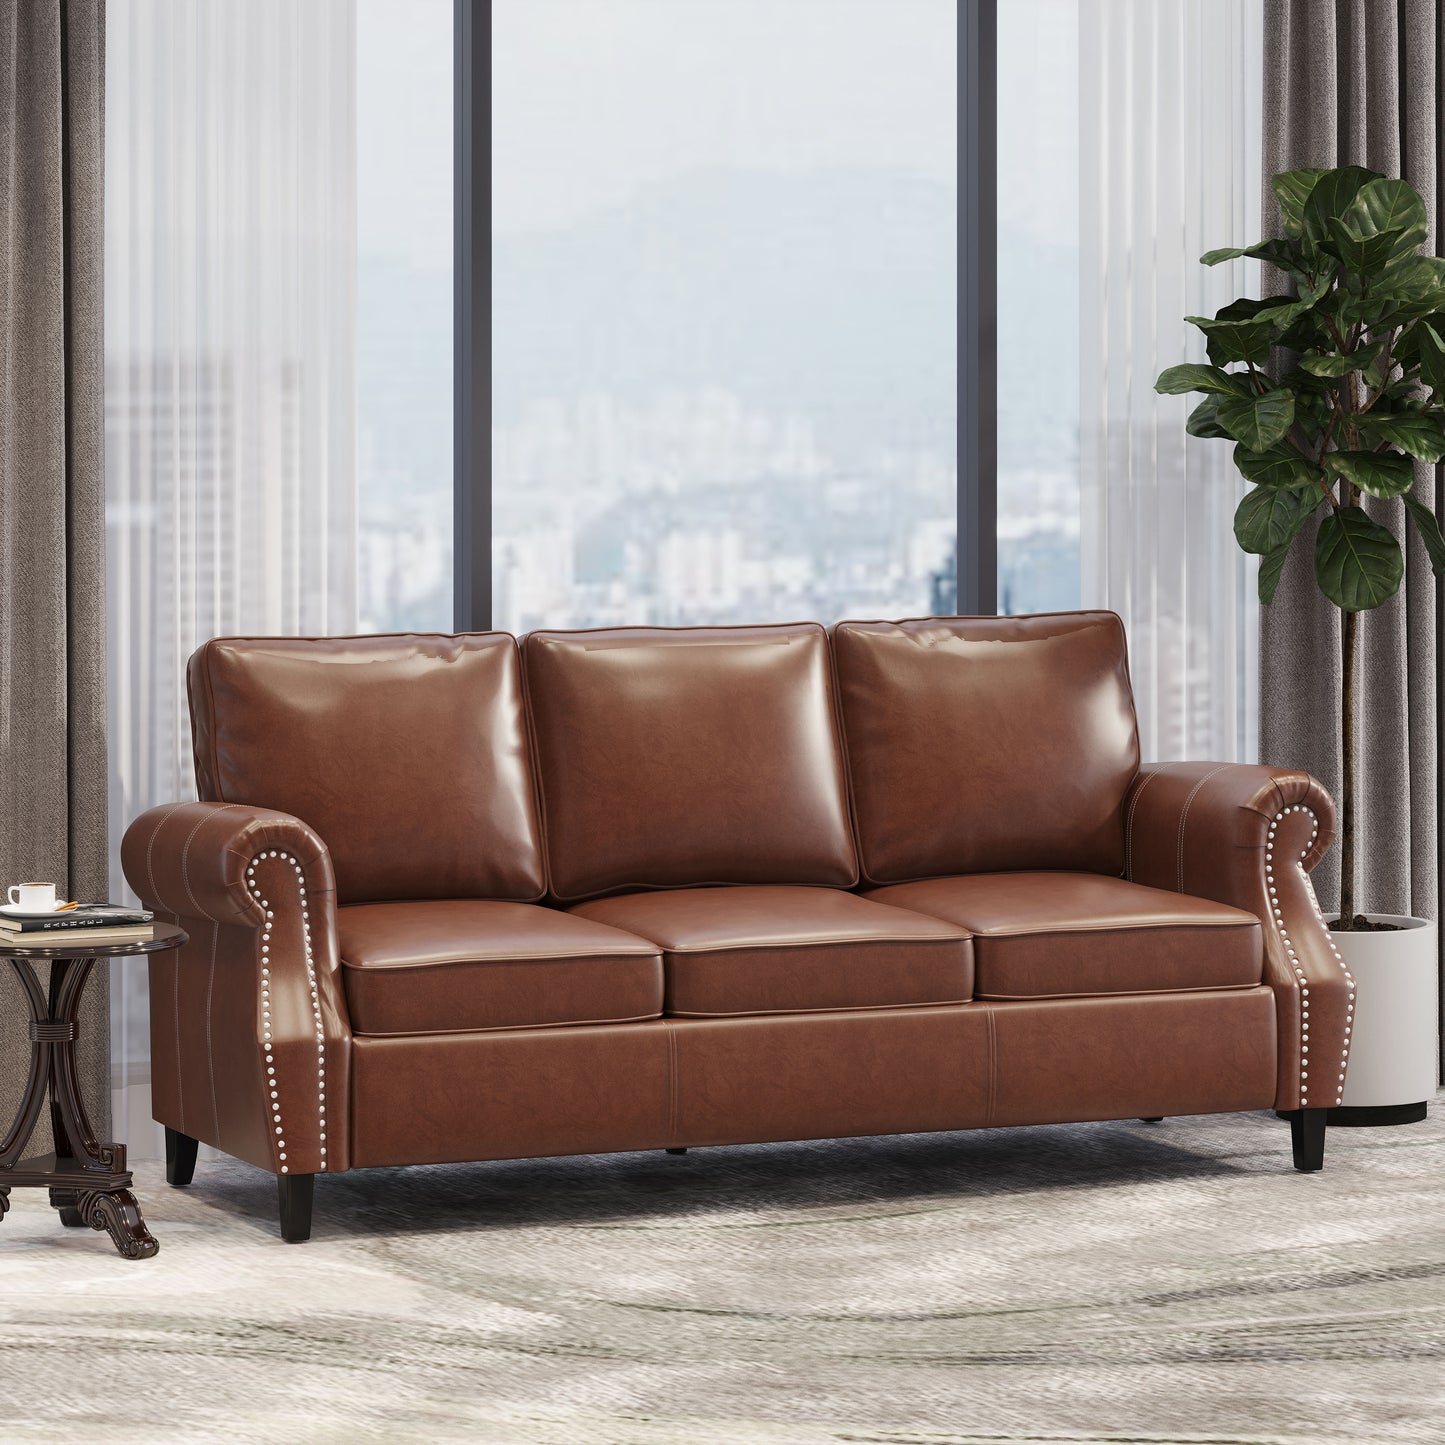 Burkehaven Contemporary Faux Leather 3 Seater Sofa with Nailhead Trim